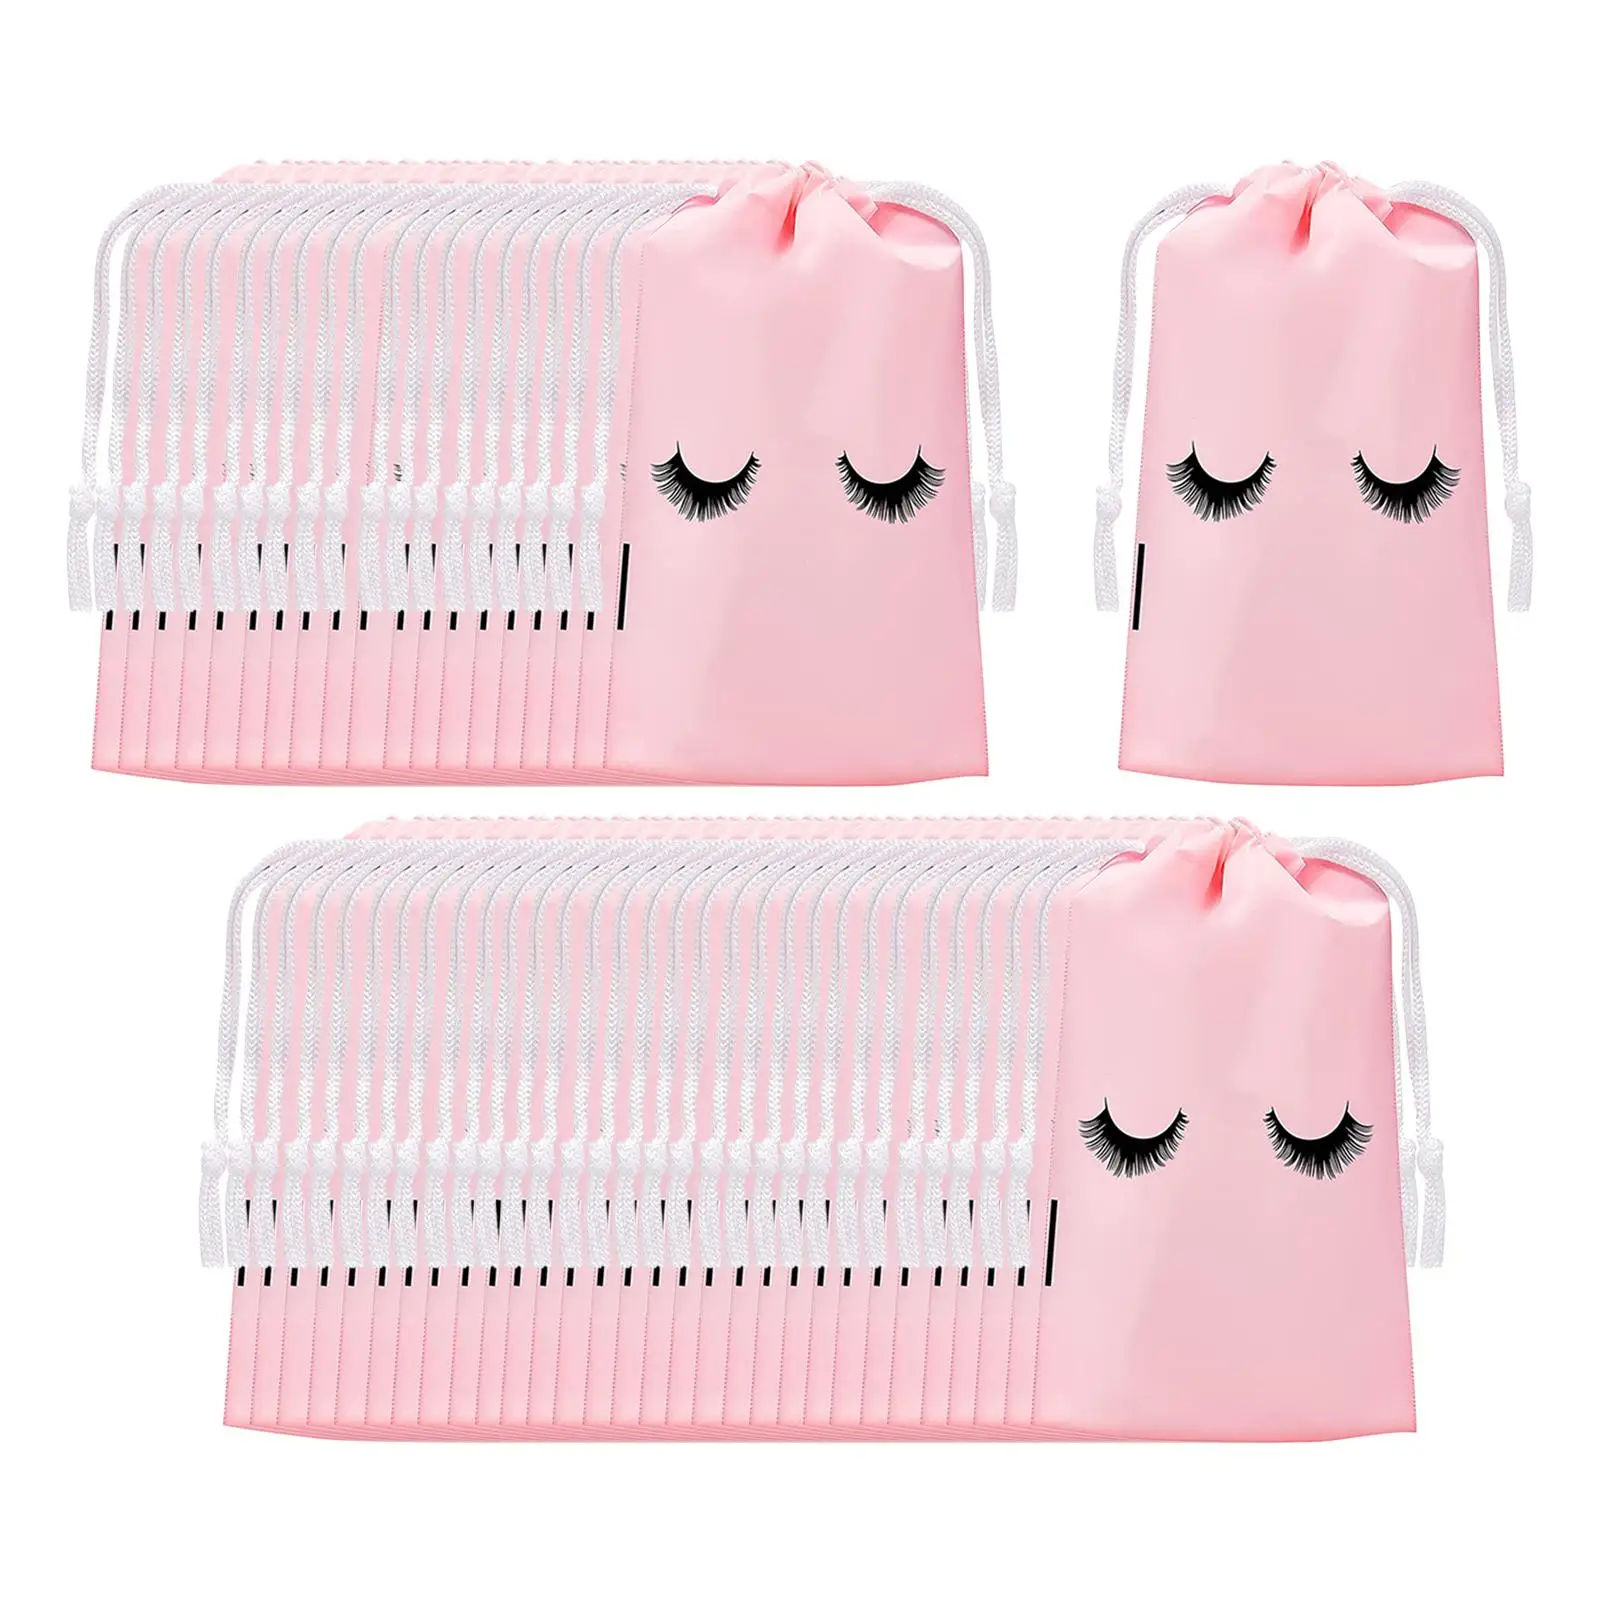 50Pcs Travel Toiletry Makeup Pouch Portable for Women Girls with Drawstring Waterproof Toiletry Bag Cosmetic Pouch Cosmetic Bag